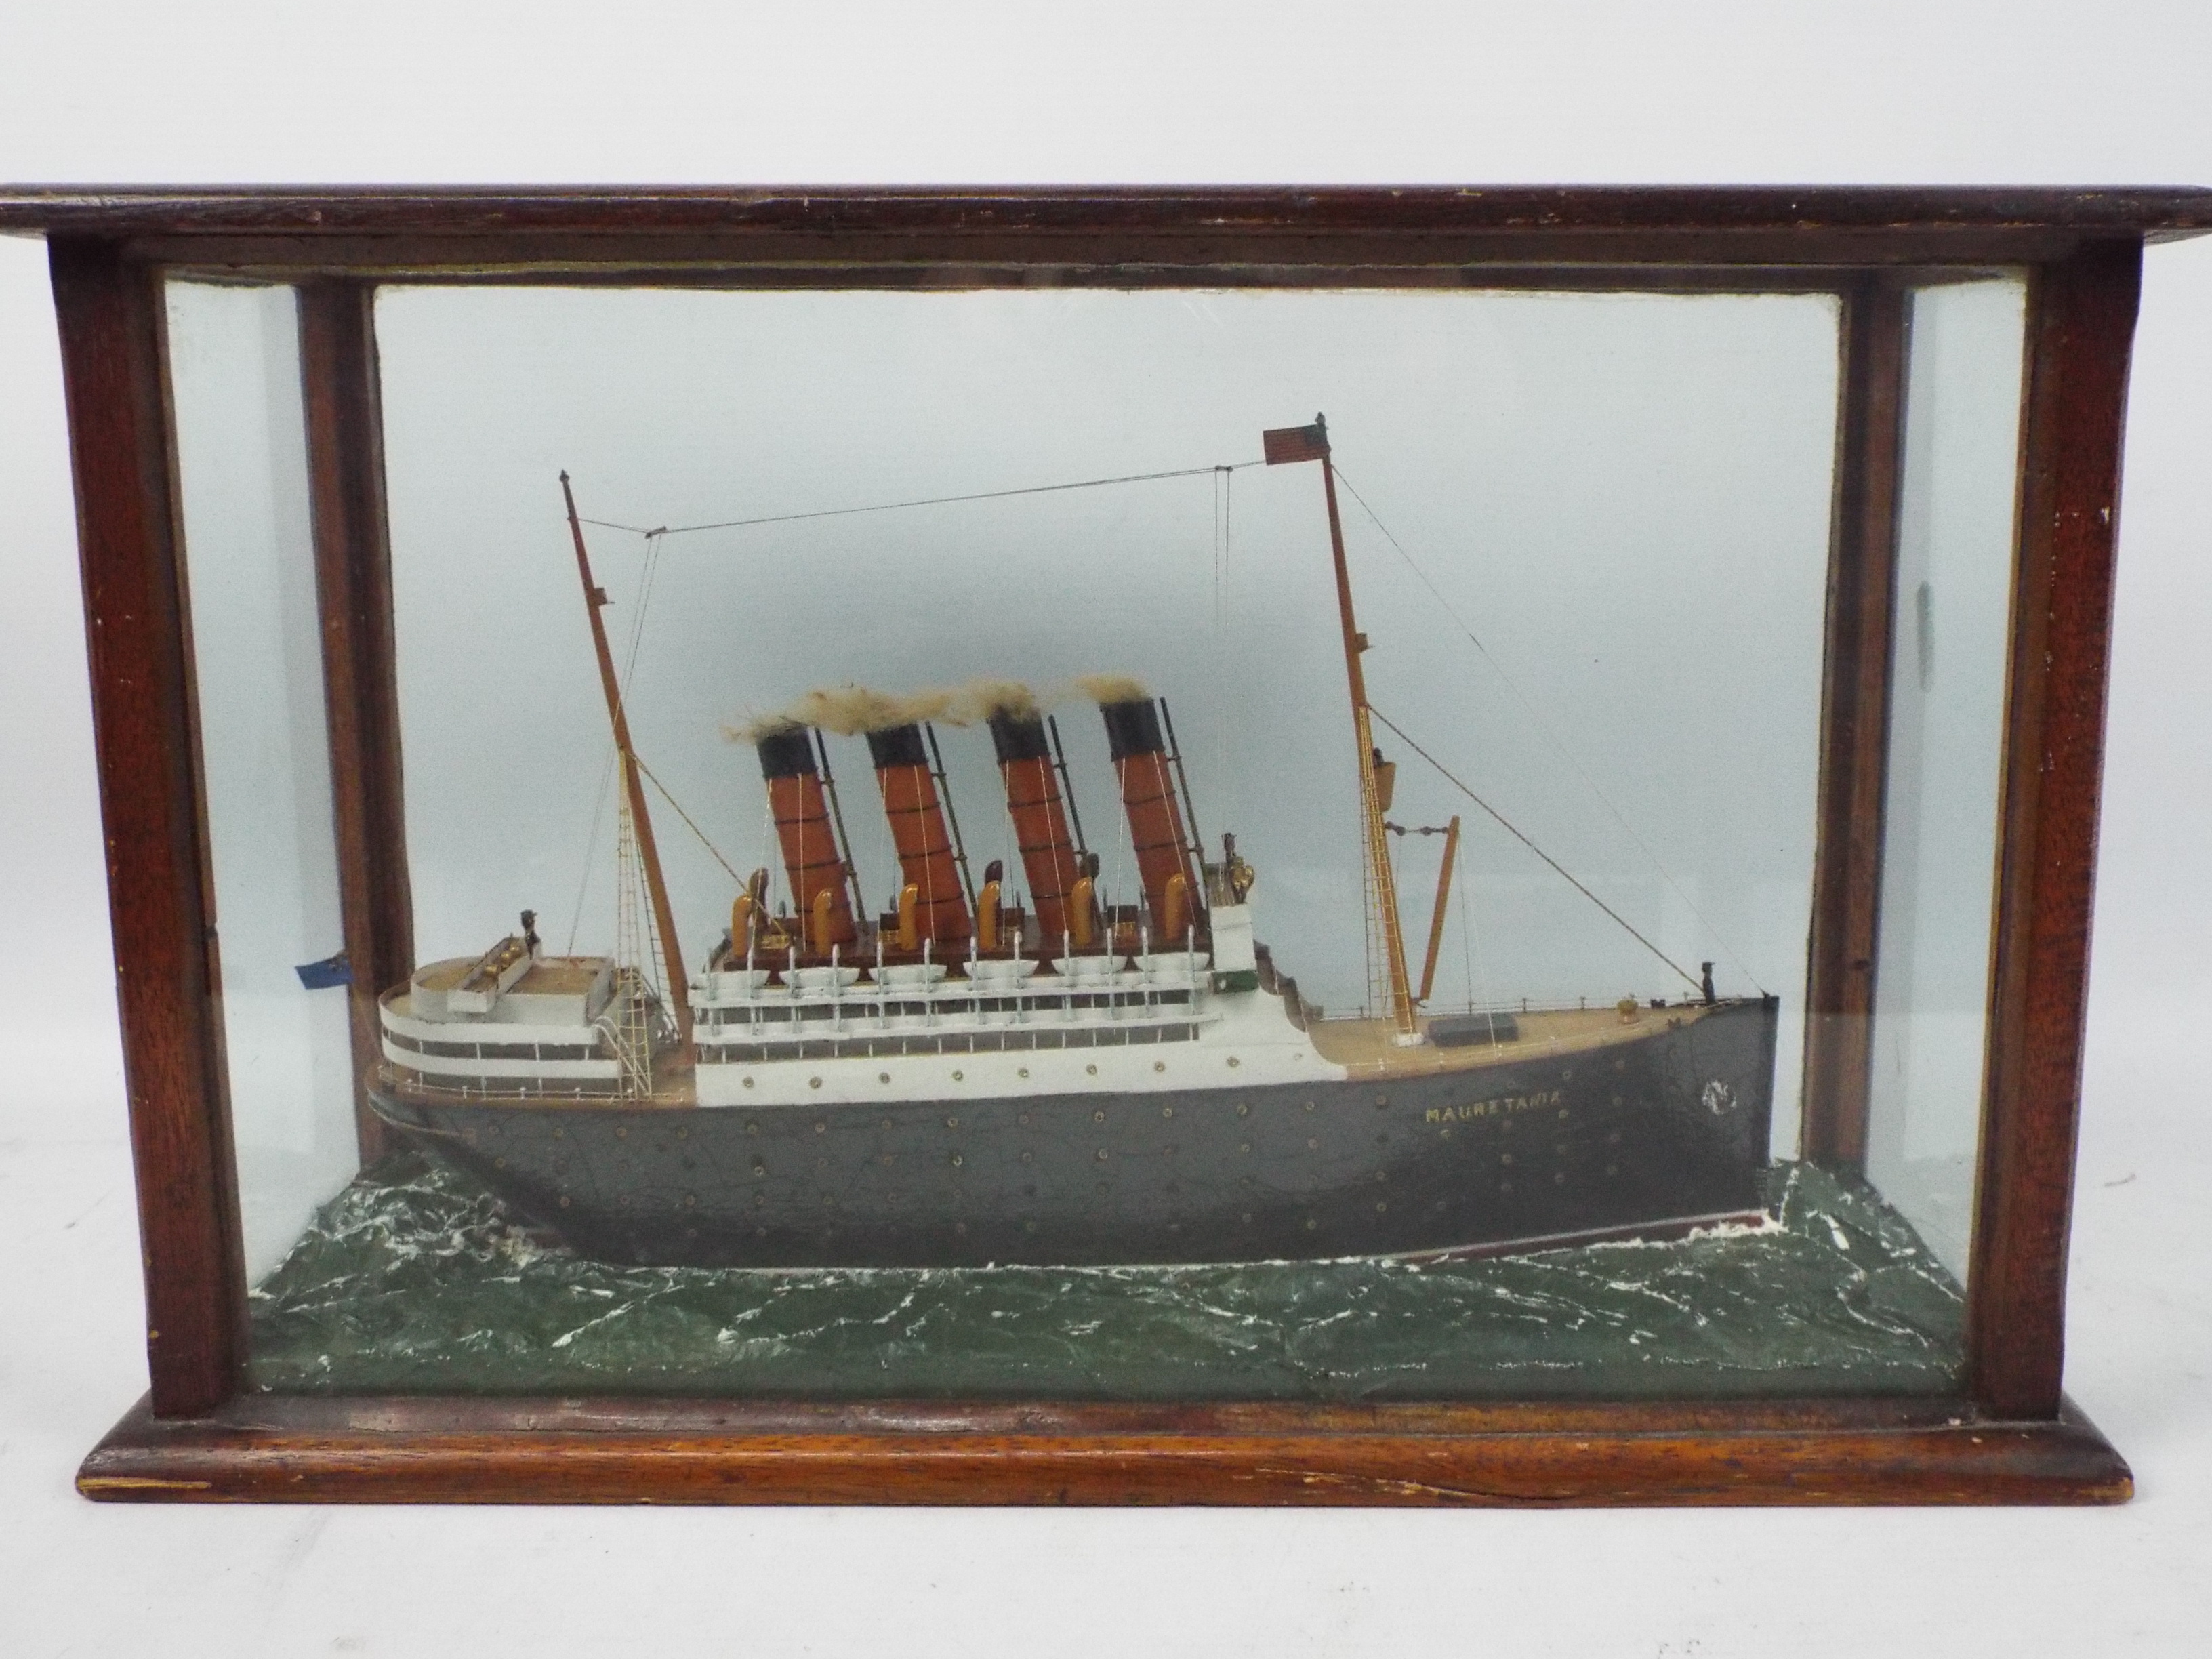 A scratch built model ship in glazed display depicting RMS Mauretania, - Image 3 of 3